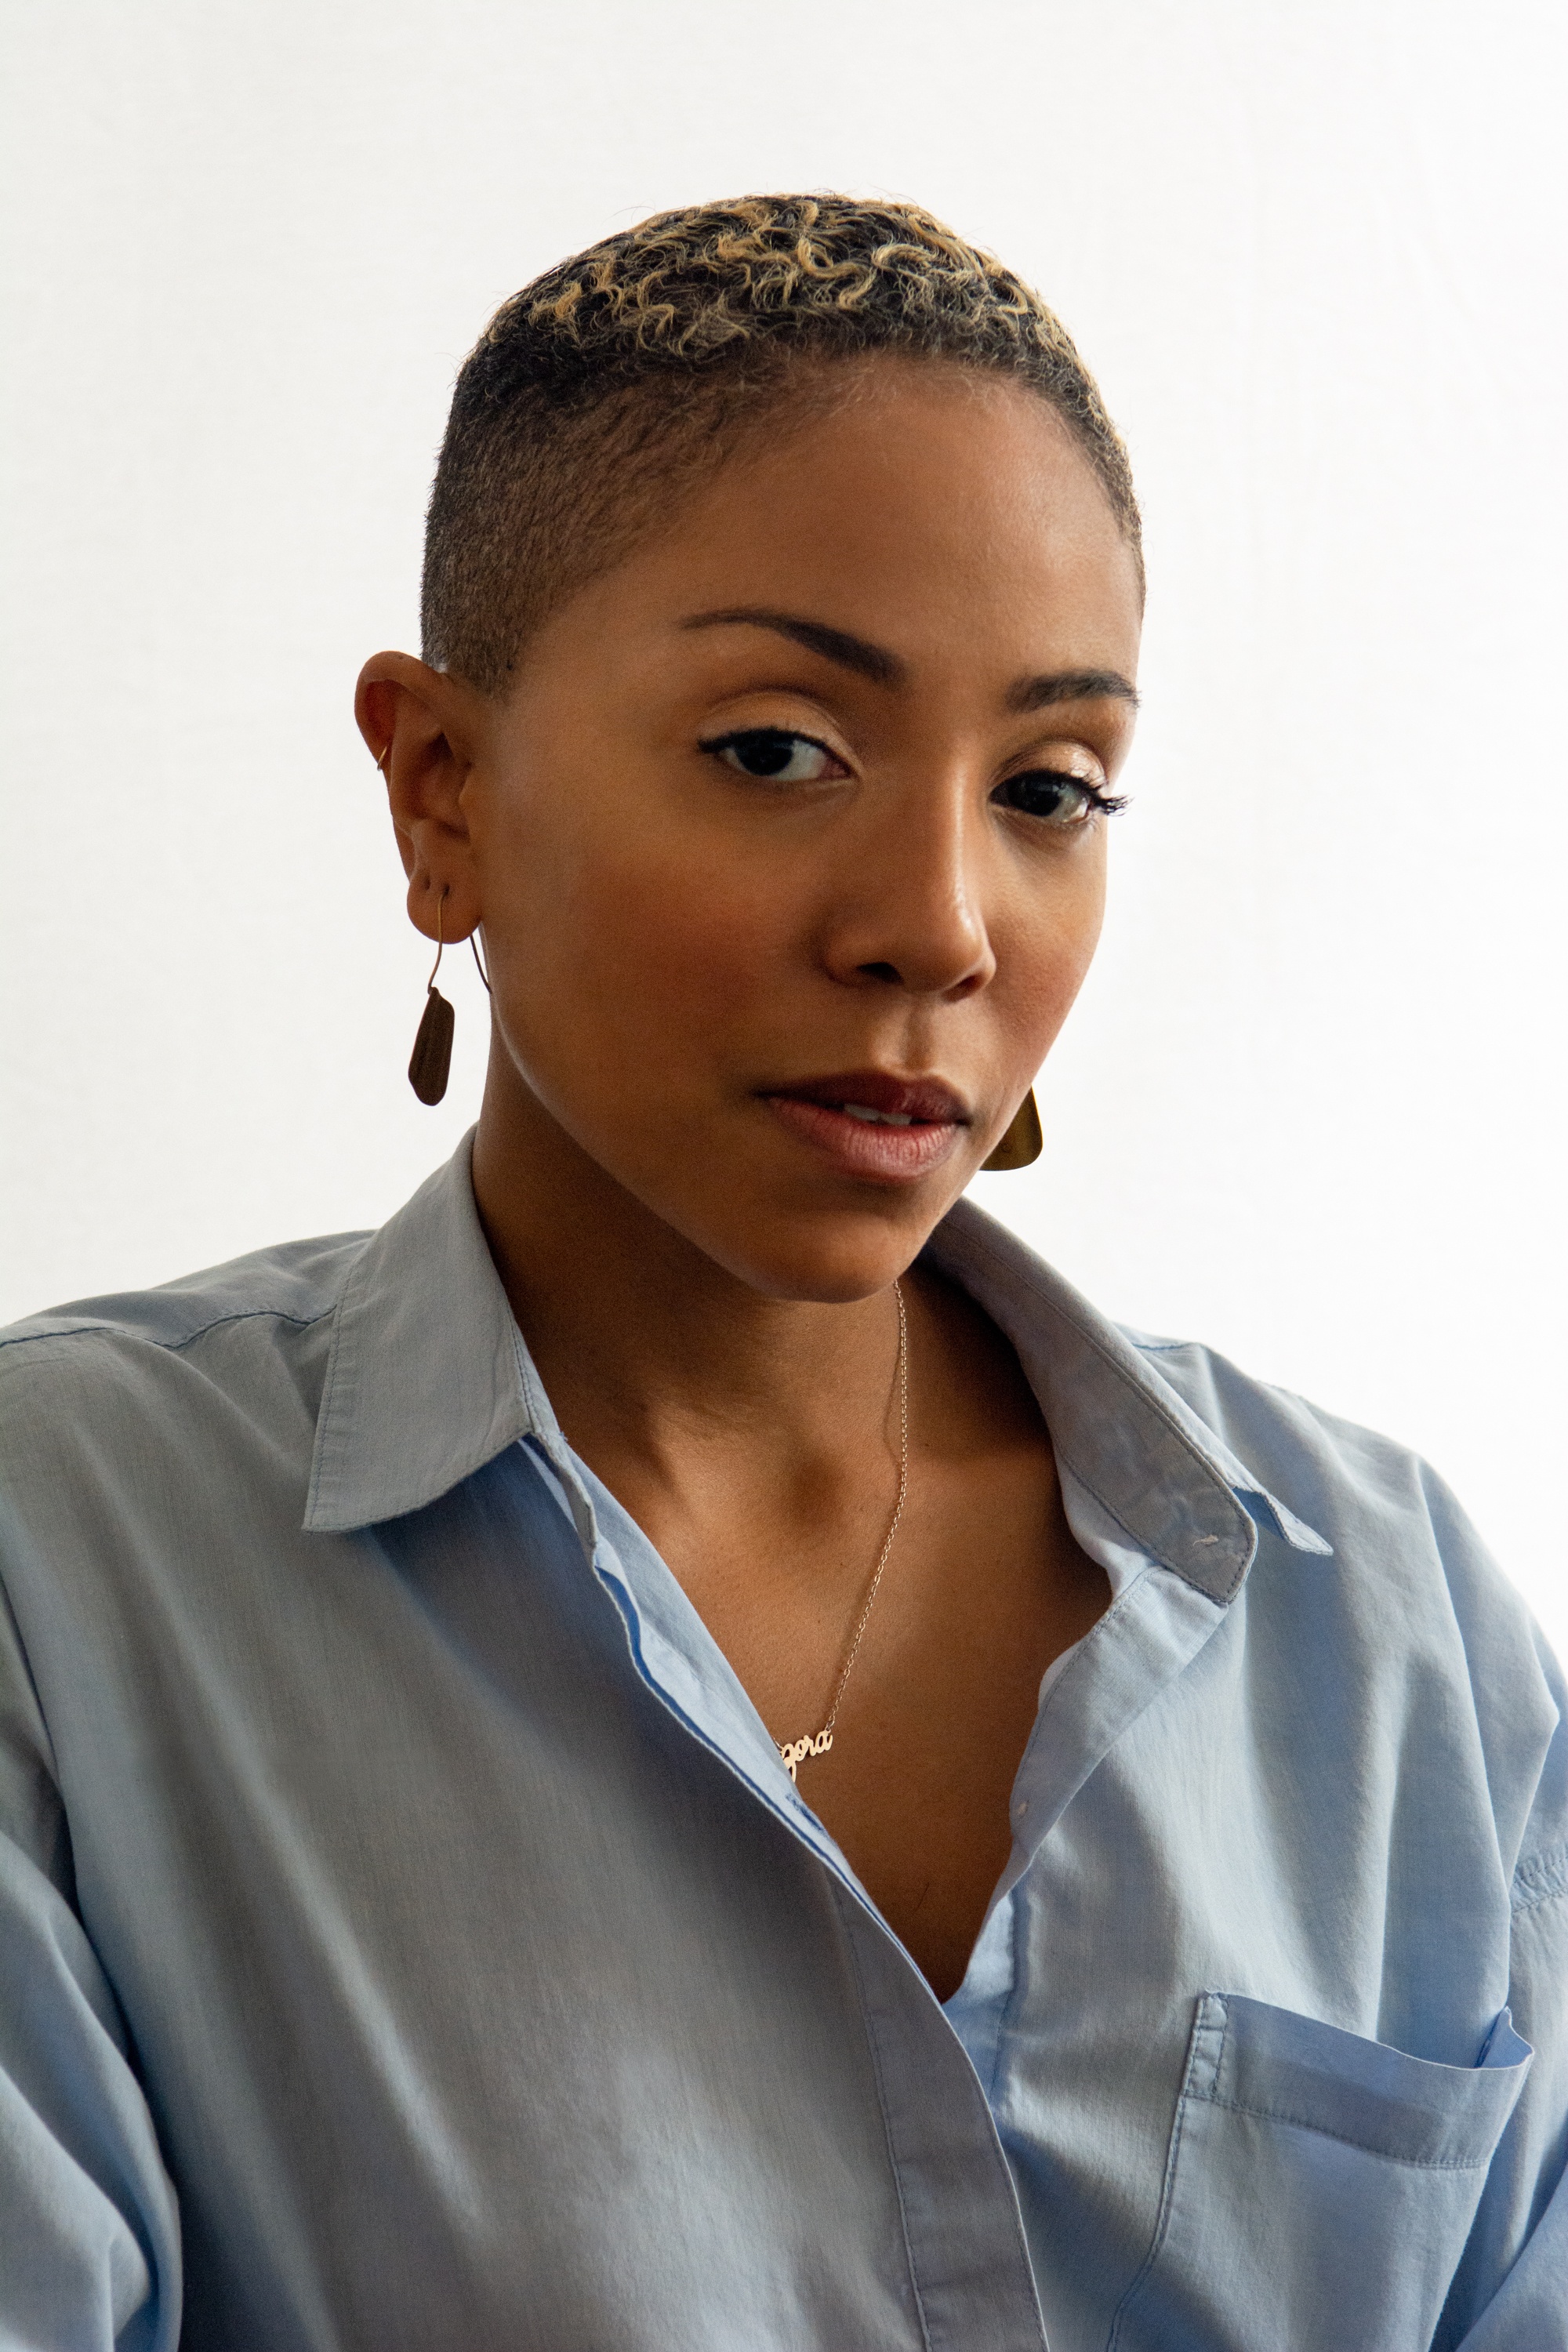 A portrait of Zora Howard with short hair, wearing earrings and a blue collared shirt